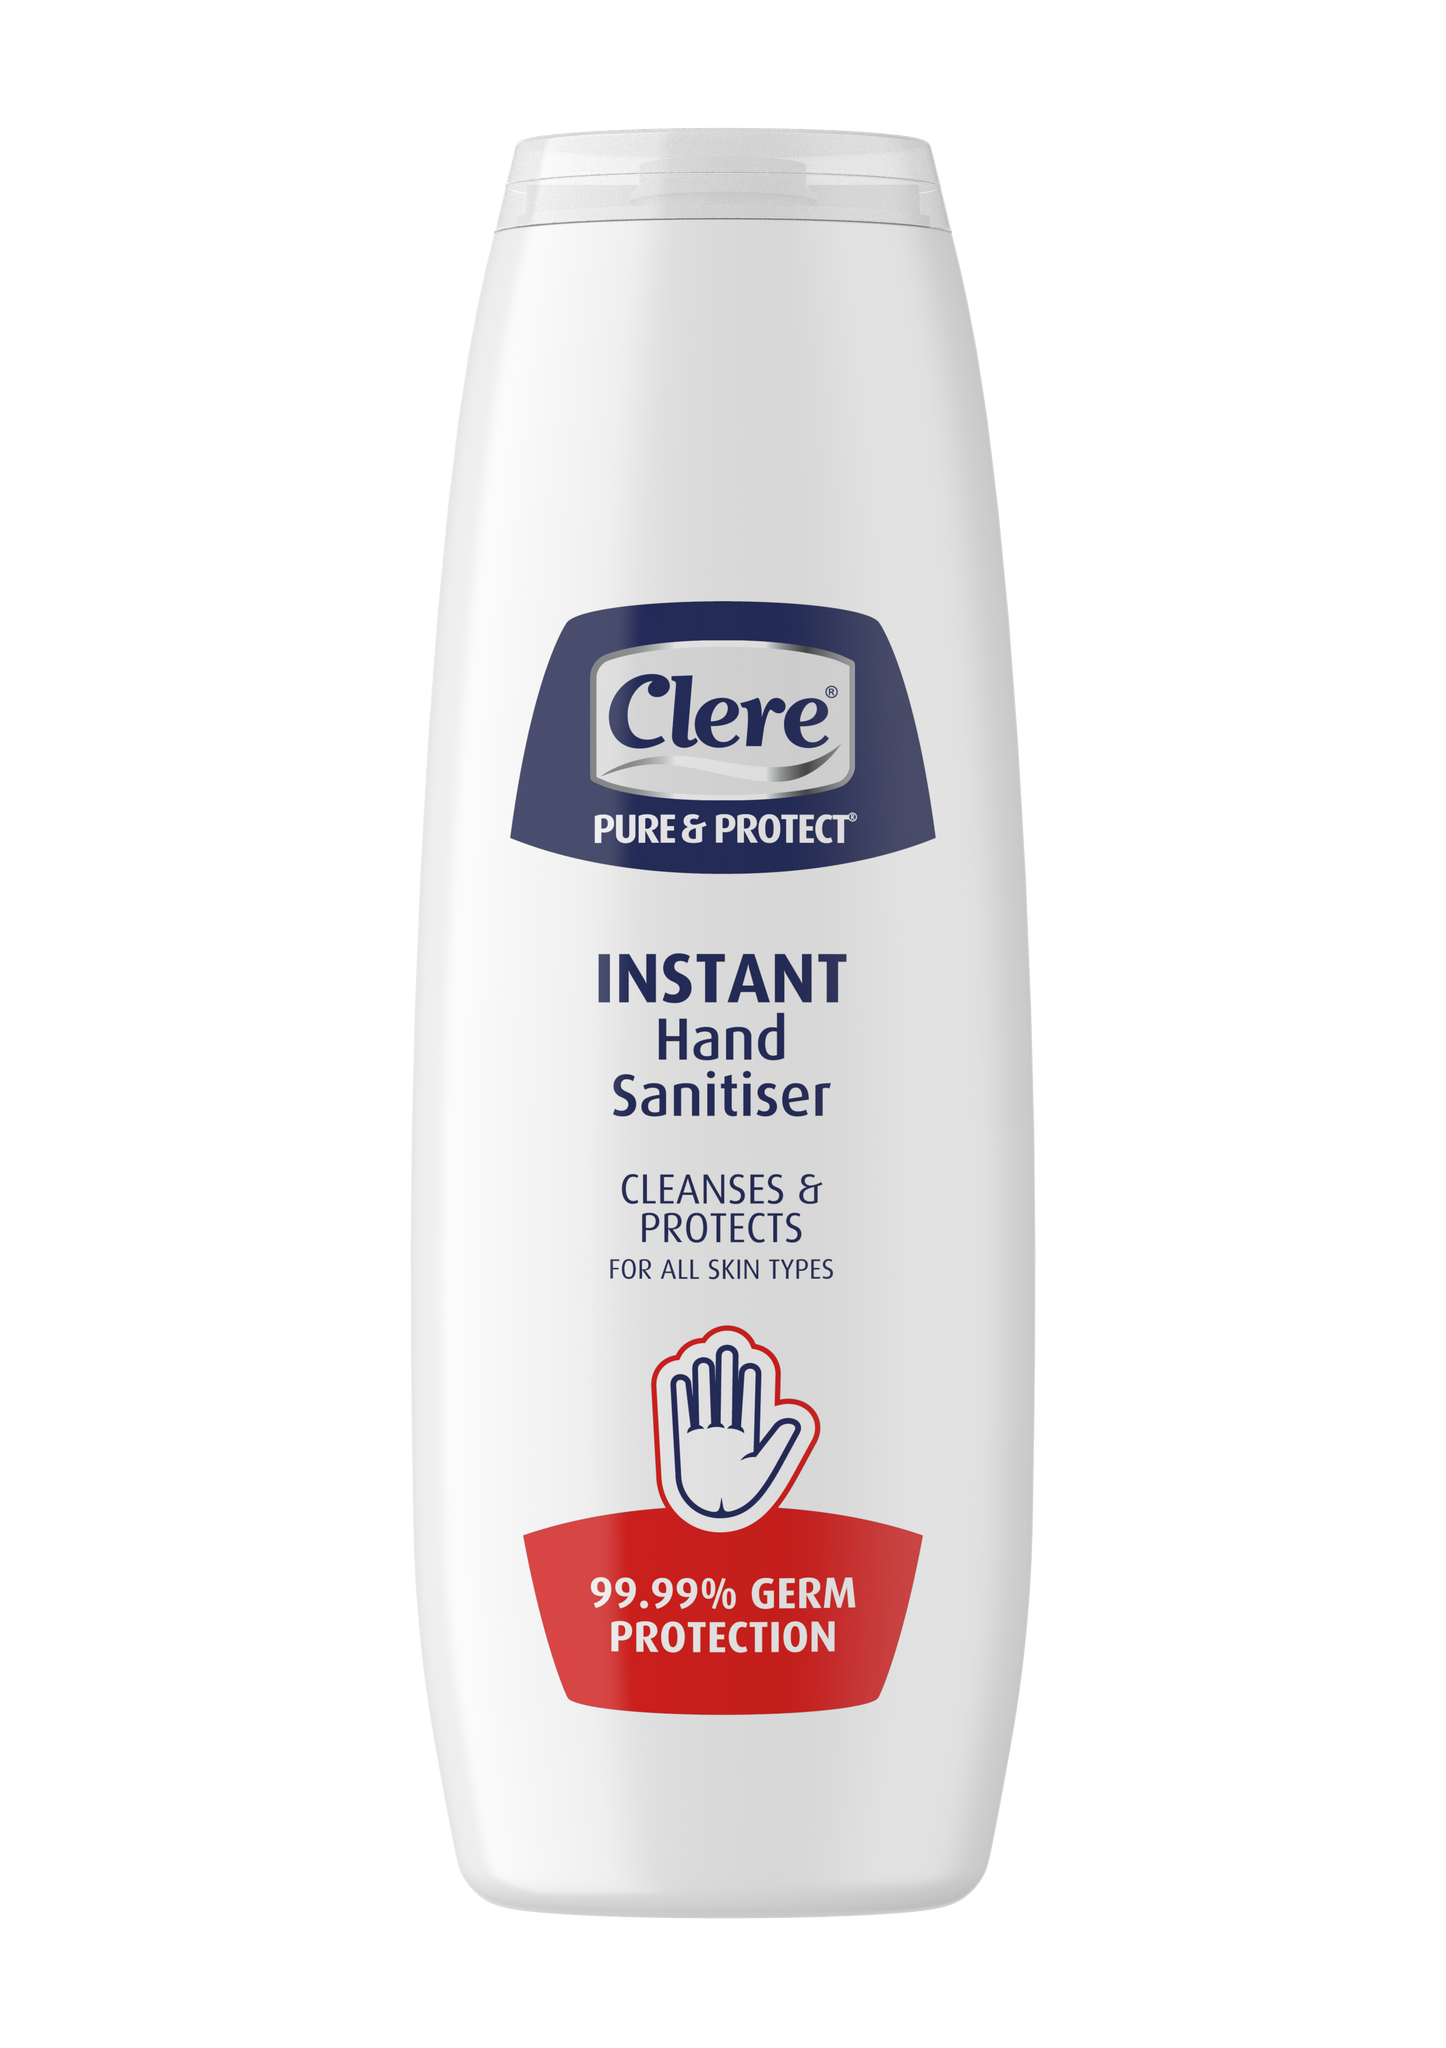 Clere Pure & Protect Instant Hand Sanitiser (Oval Bottle) - Gel - 200ml